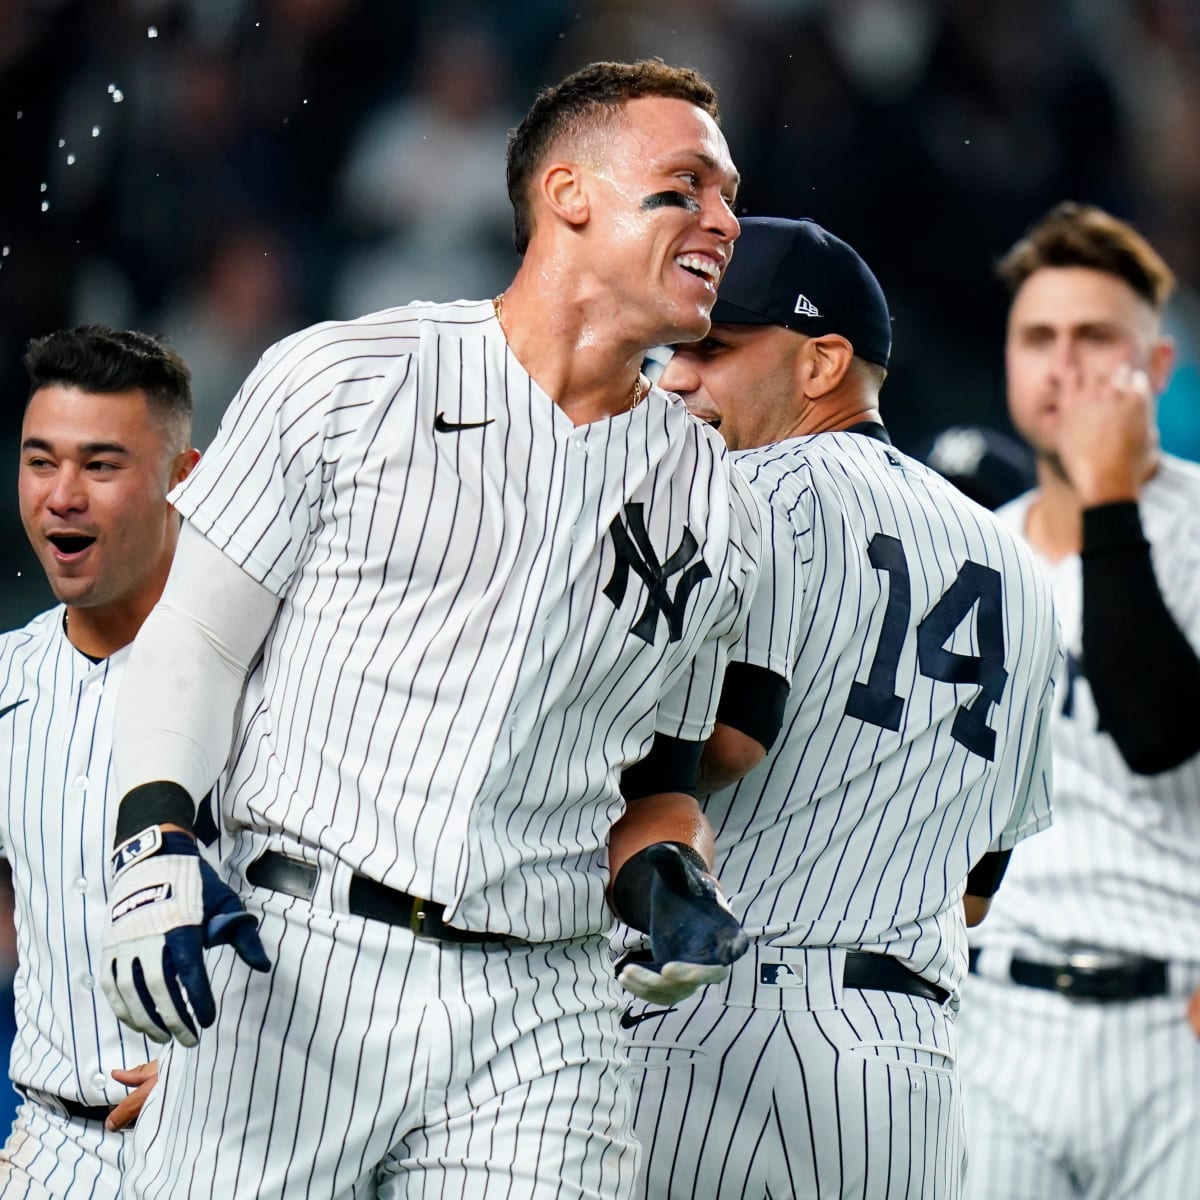 Yankees Are Off to Third Best Start in Franchise History - The New